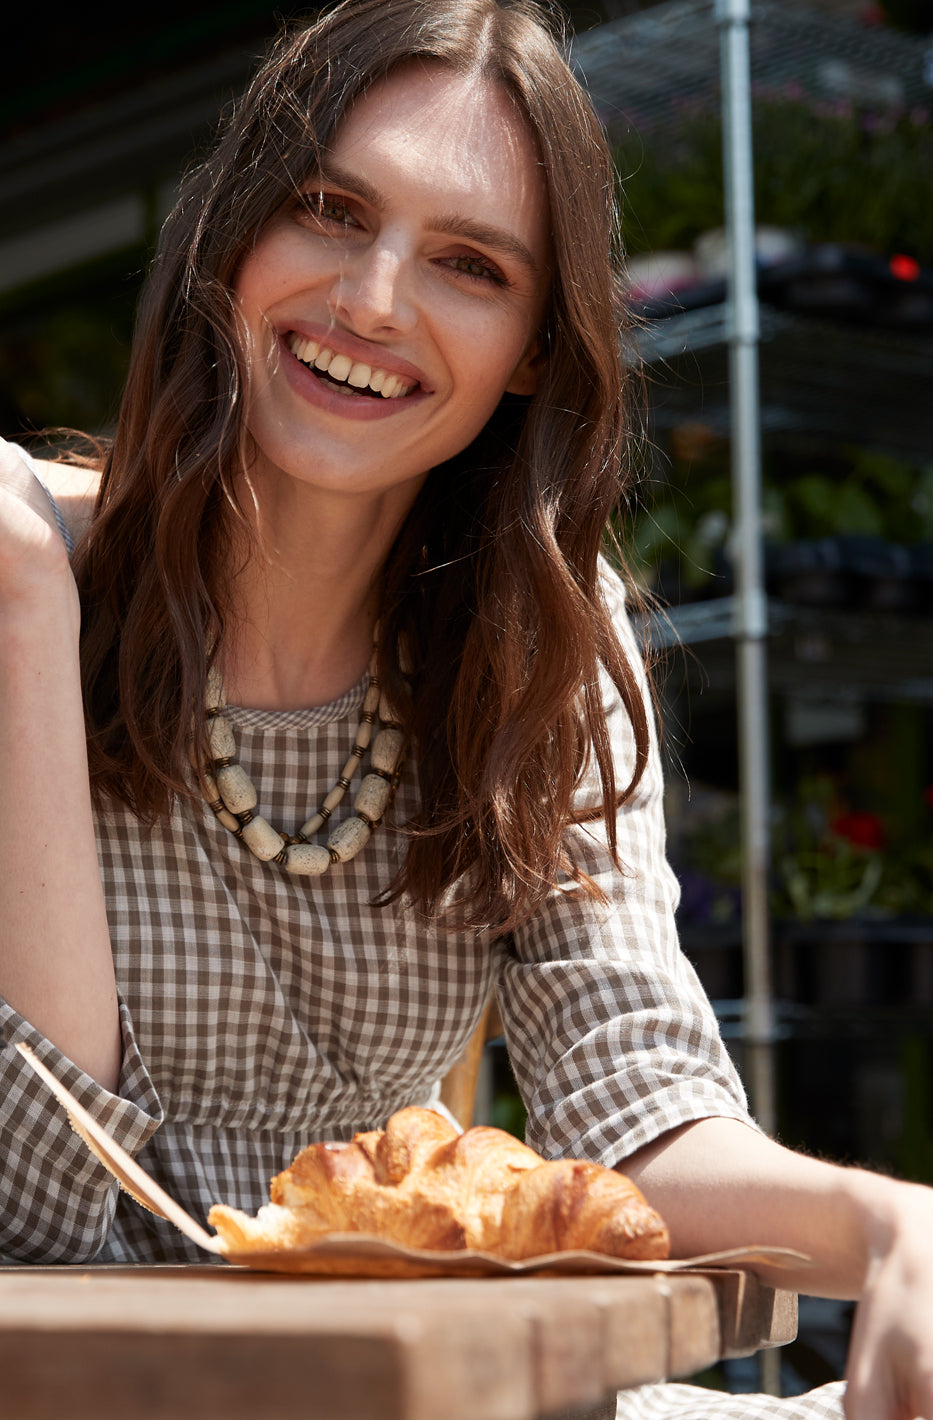 Happy woman wearing a tunic top and some food on a wooden table.